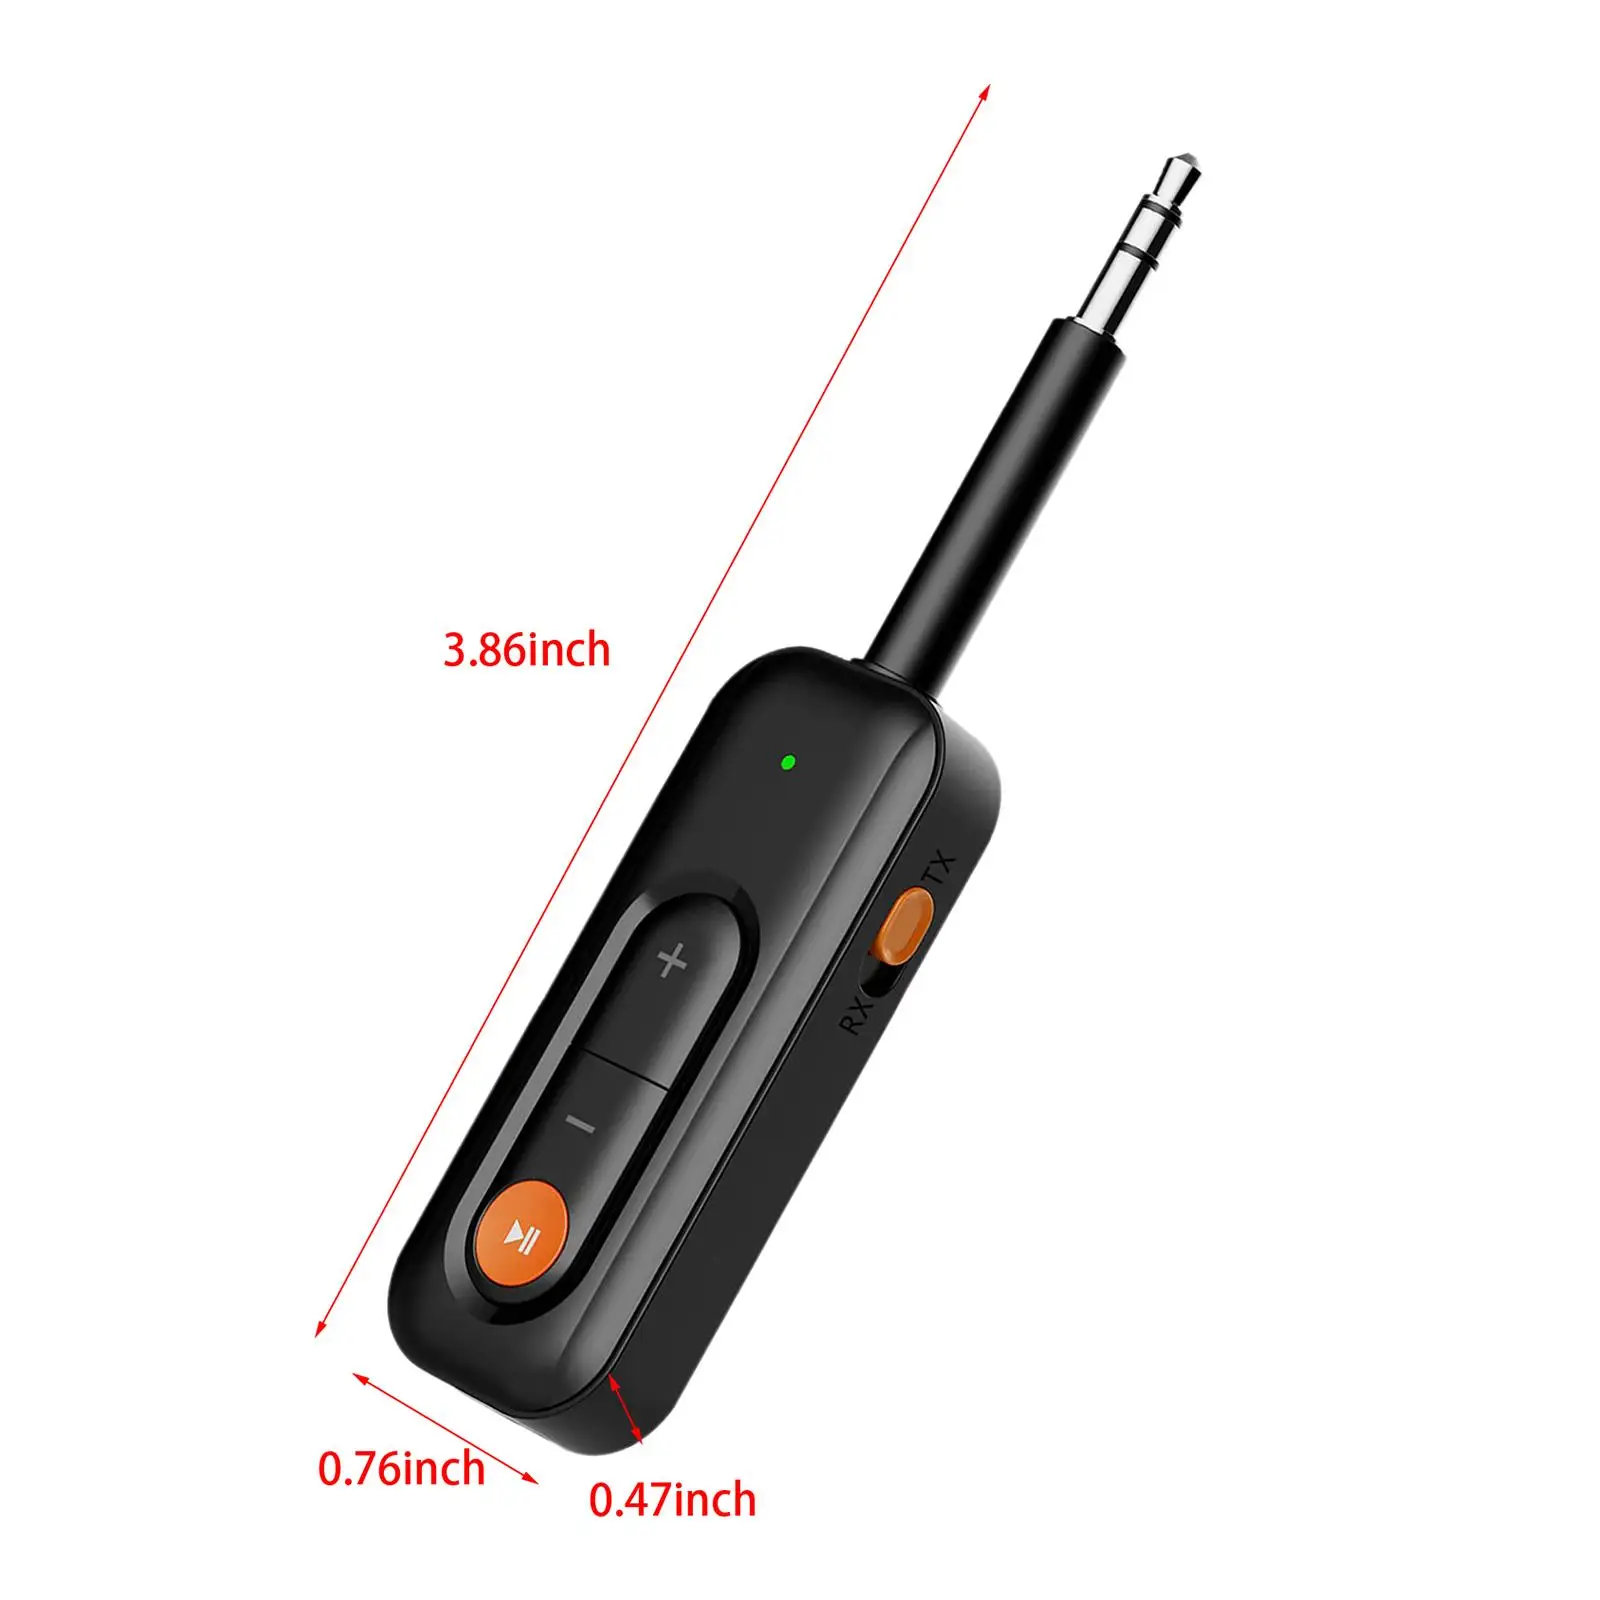 Audio Transmitter and Receiver Transceiver Noise Canceling Lightweight Portable Car AUX Audio Adapter for Home Stereo System PC